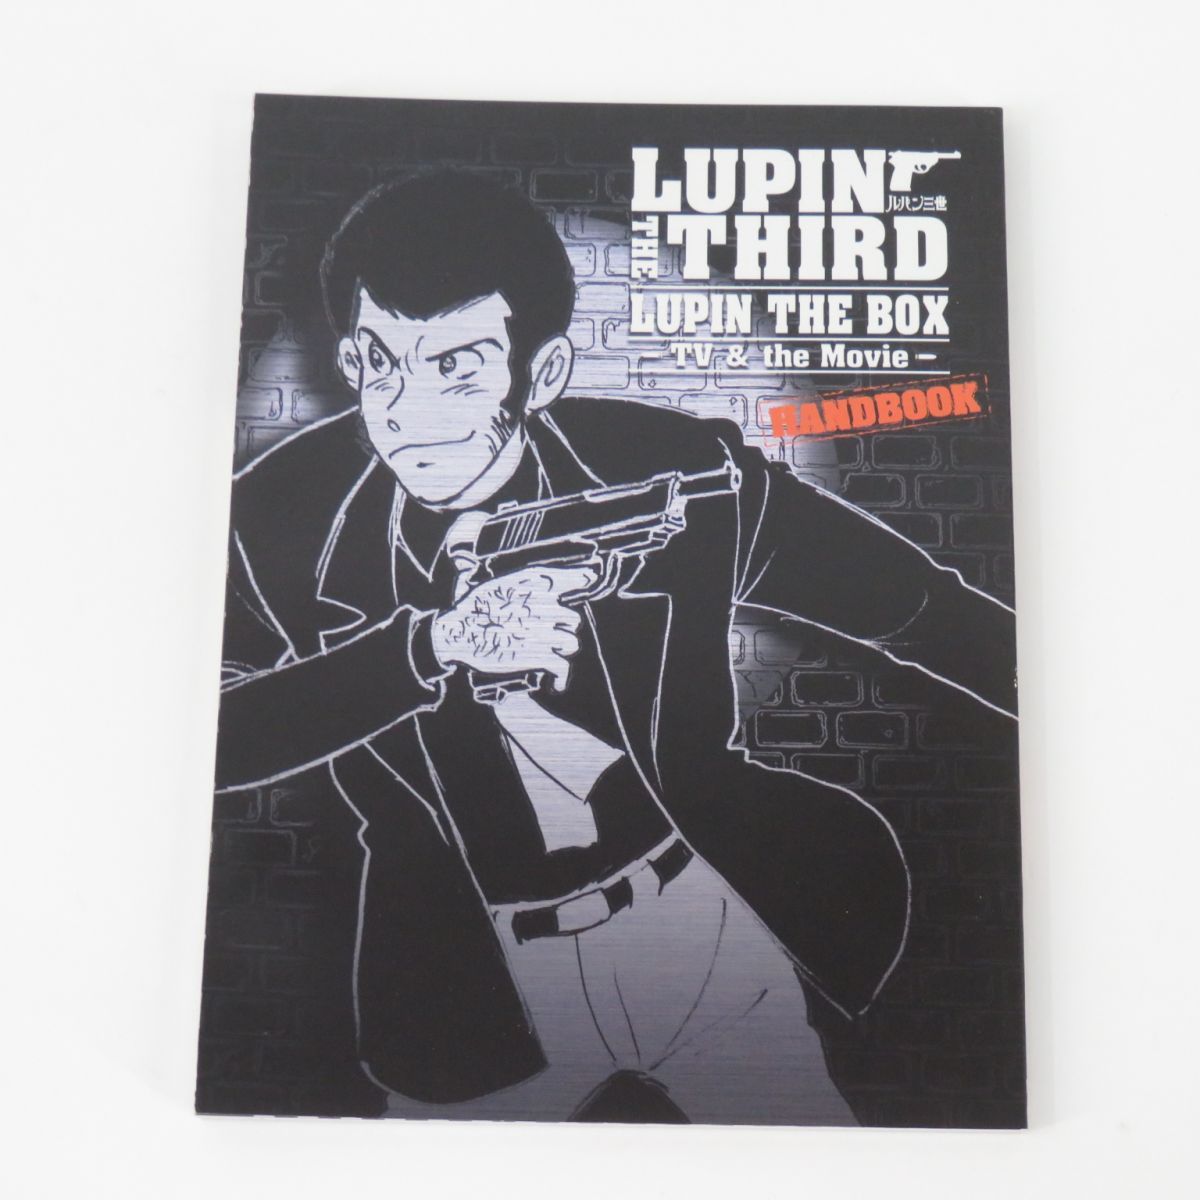 DVD ルパン三世 LUPIN THE BOX -TV ＆ the Movie- 42枚組 初回生産限定